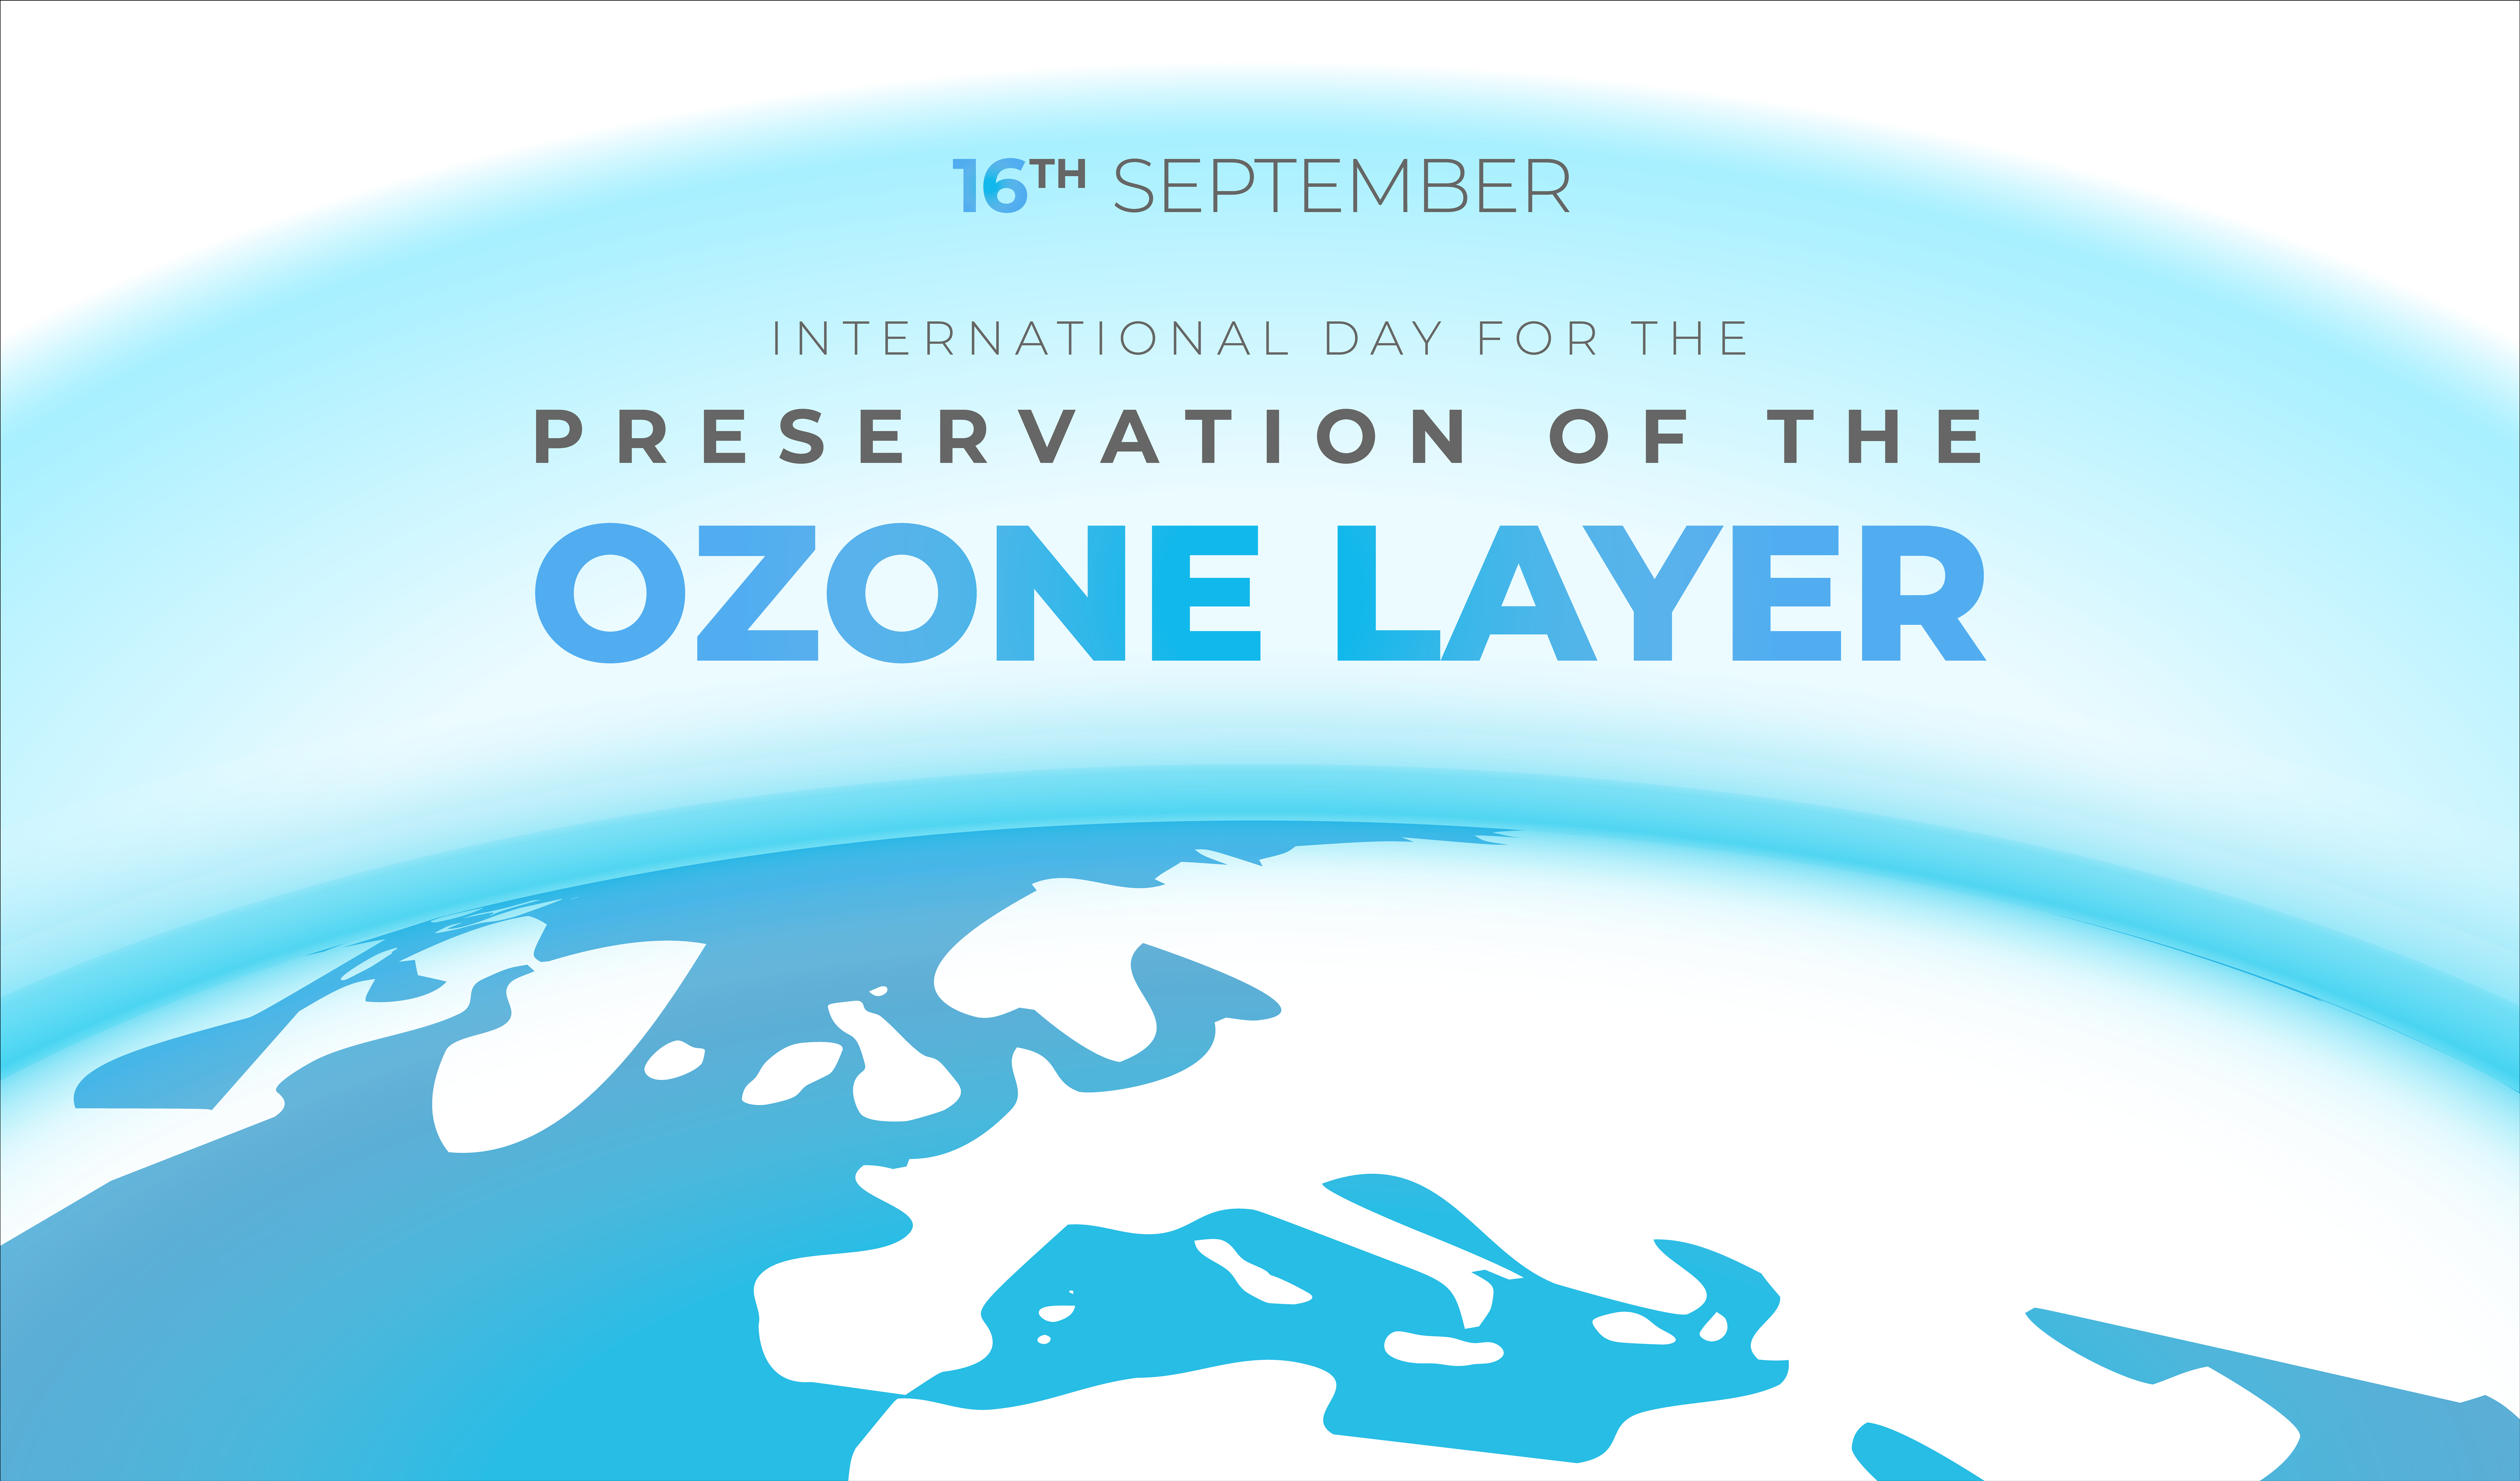 international day for the preservation of the ozone layer header image